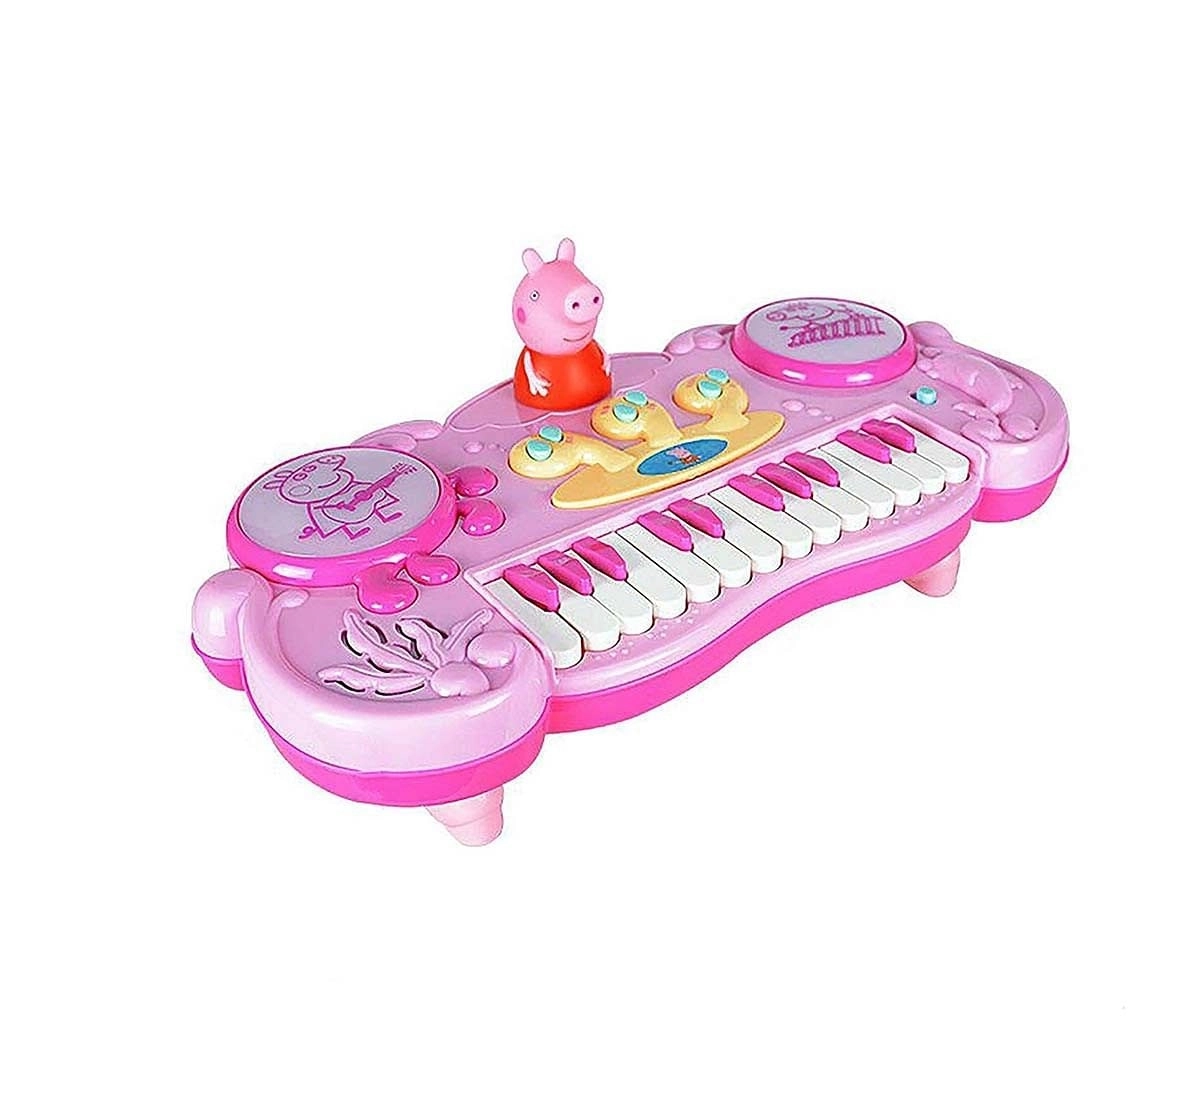 Peppa Pig Pink Piano Musical Toys for Kids age 24M+ 